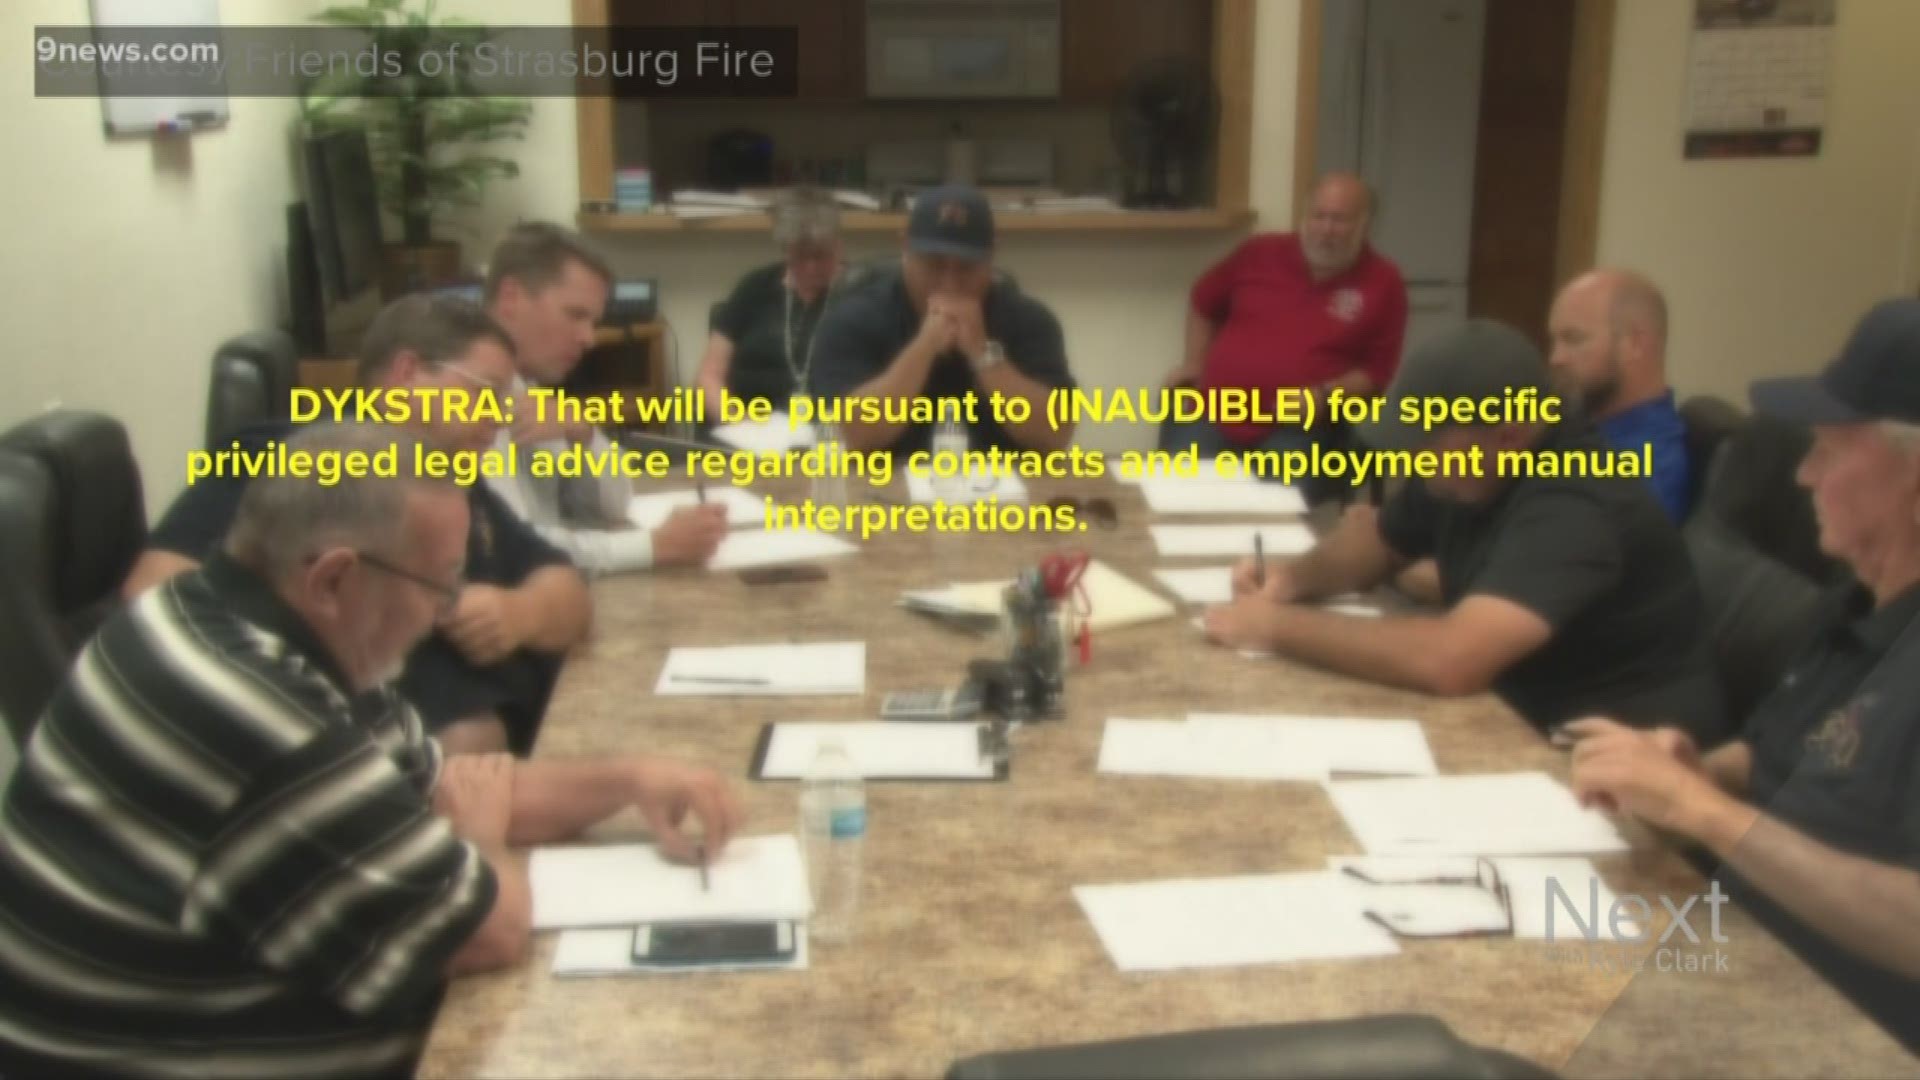 A group of concerned citizens, Friends of Strasburg Fire, filed a complaint last week in Adams County Court, alleging the group went into executive session without a vote and discussed items that aren’t allowed in executive session.